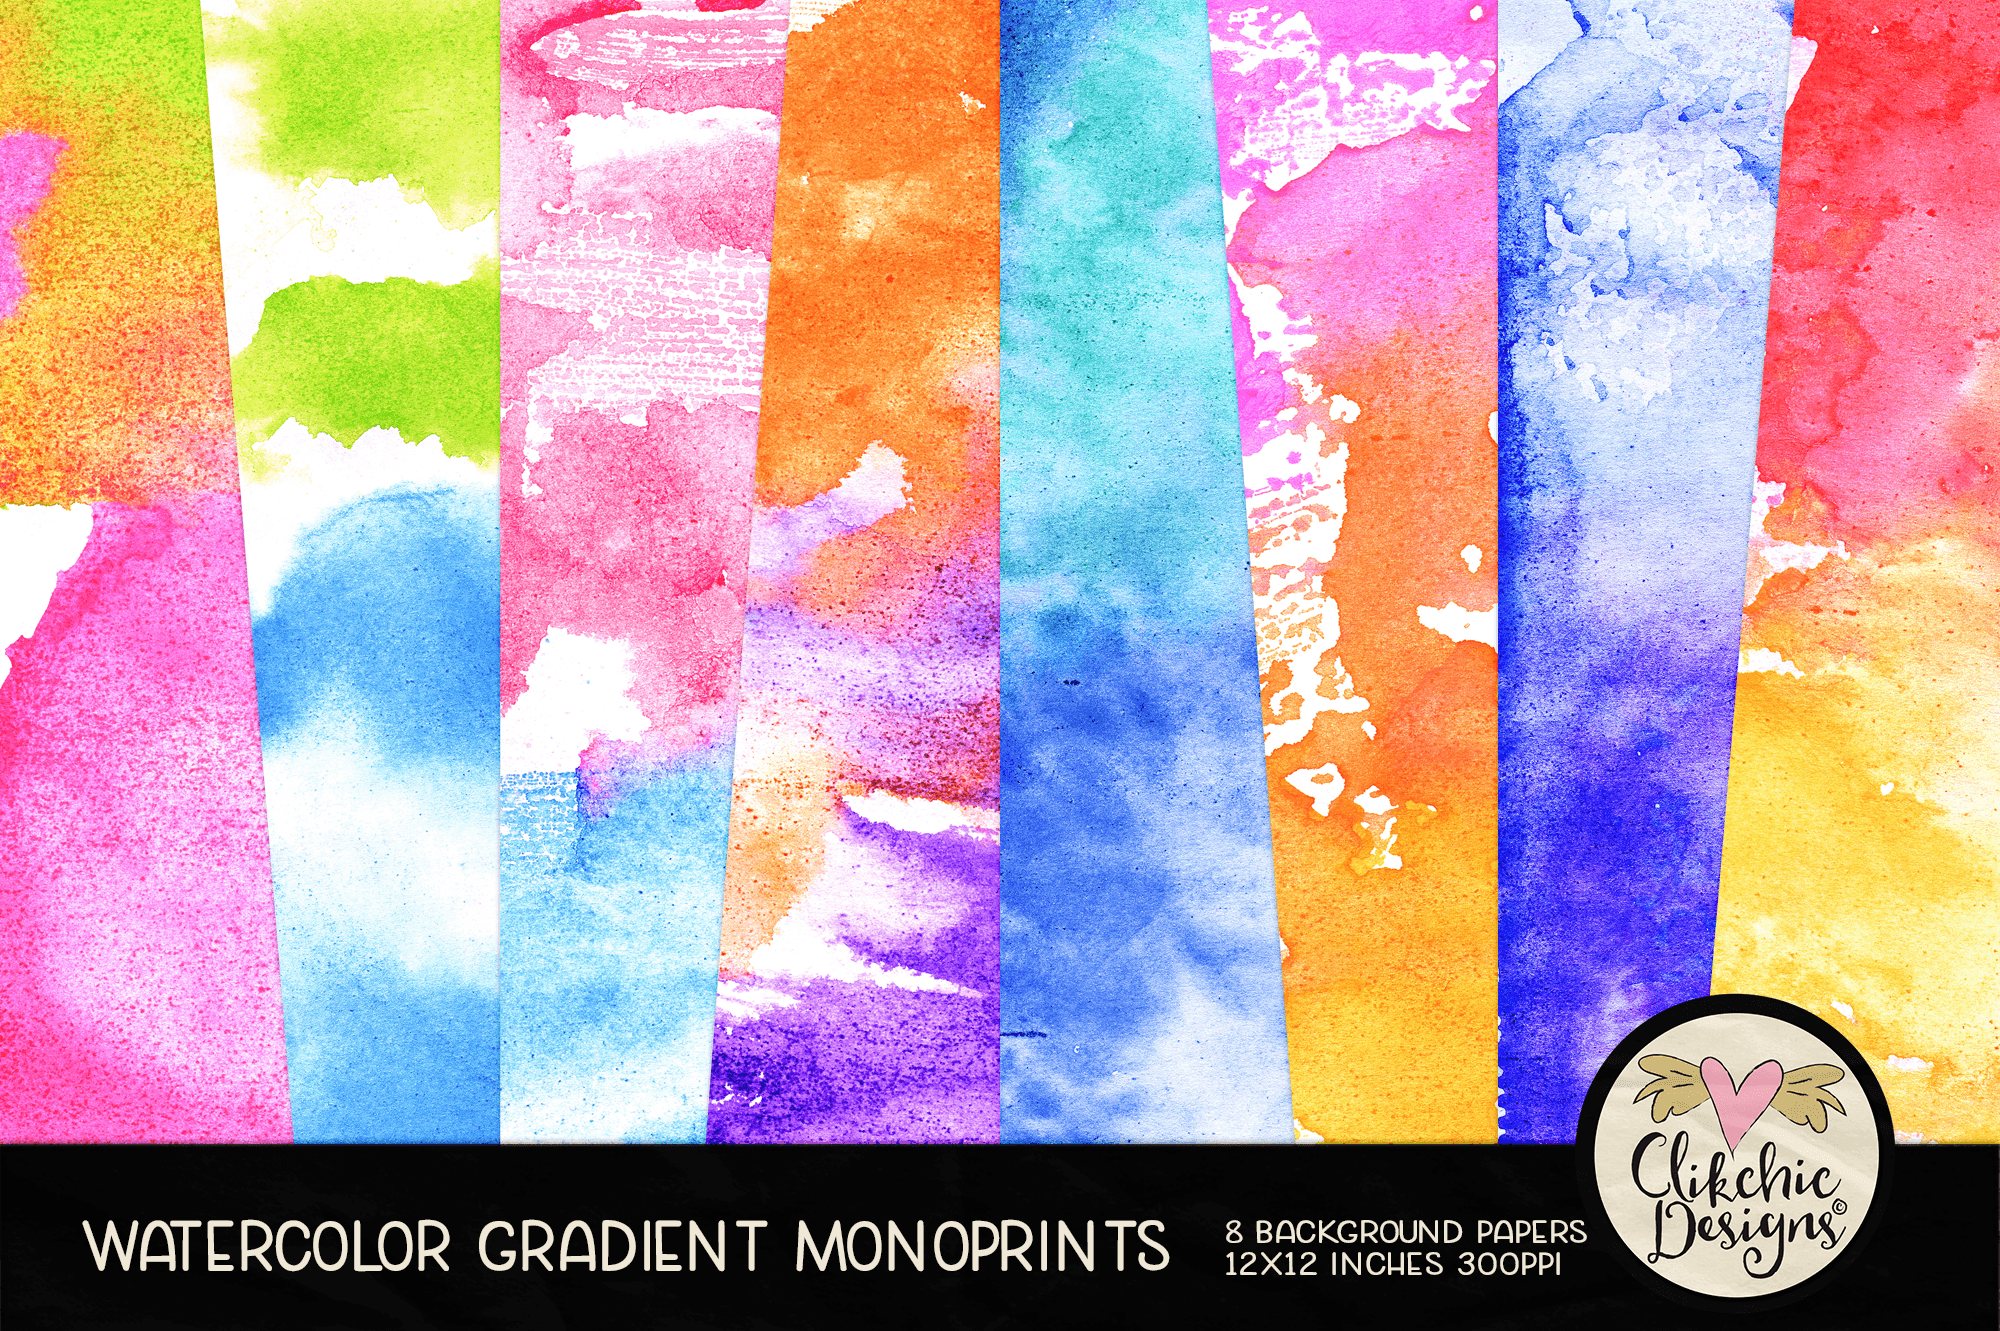 Watercolor Monoprint Gradients Printable Background Papers